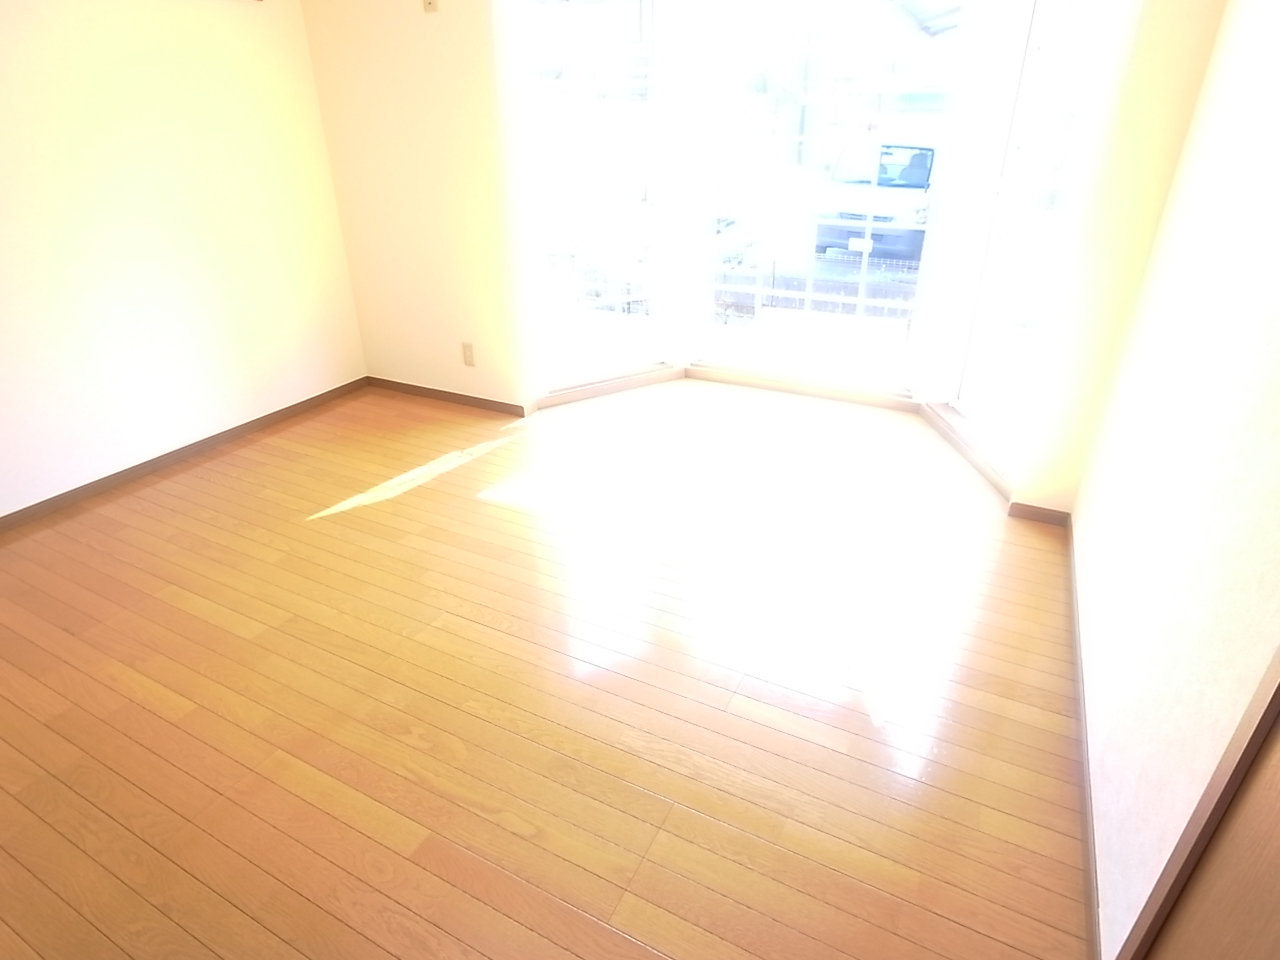 Other room space. It is a bright south-facing ^^